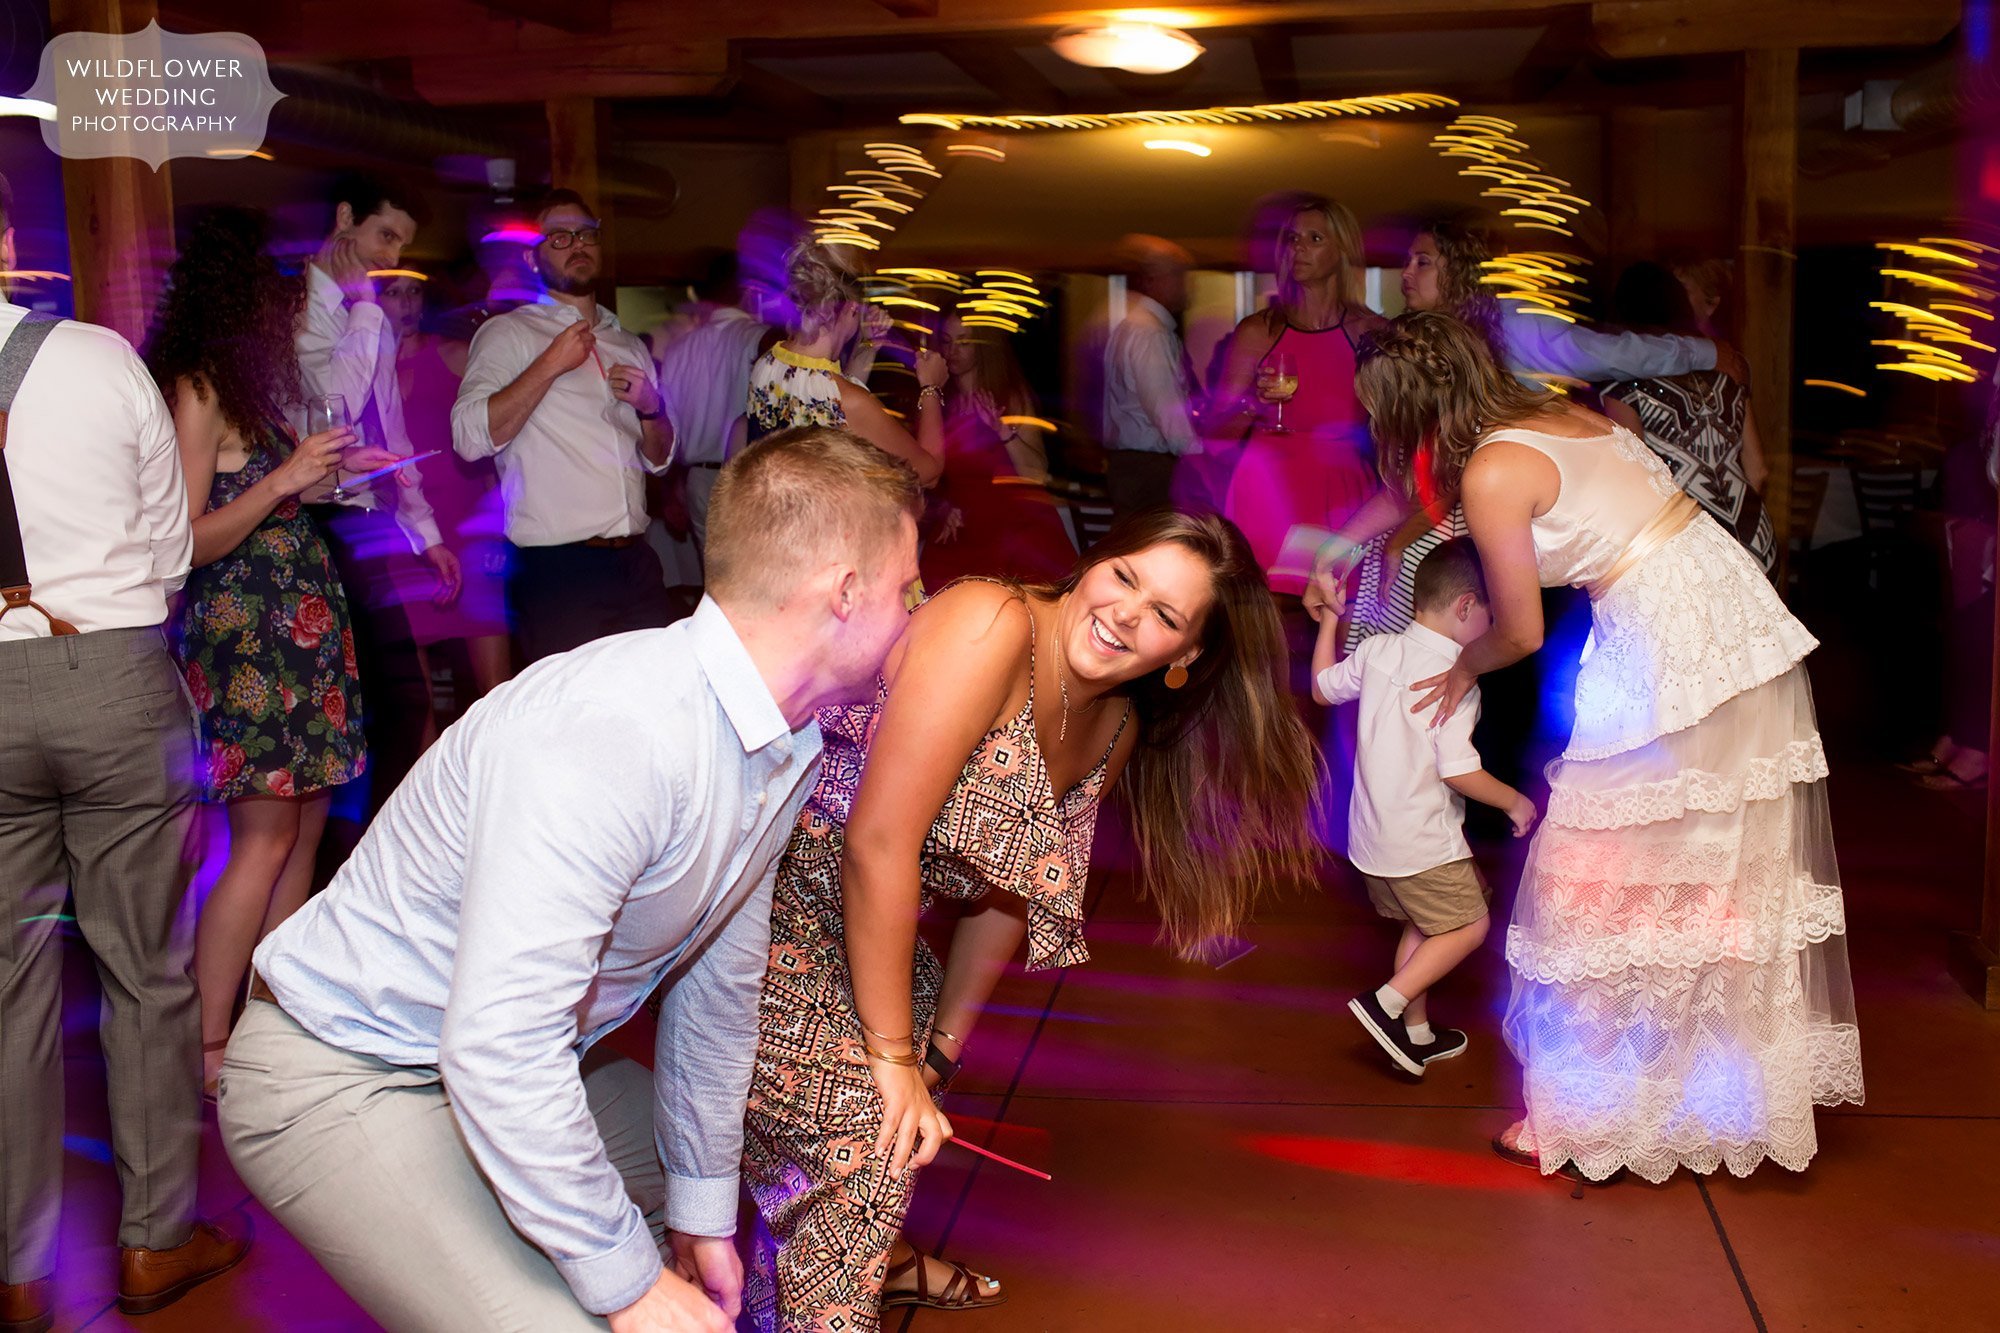 guests dance in the middle of a dance floor with uplighting at les bourgeois